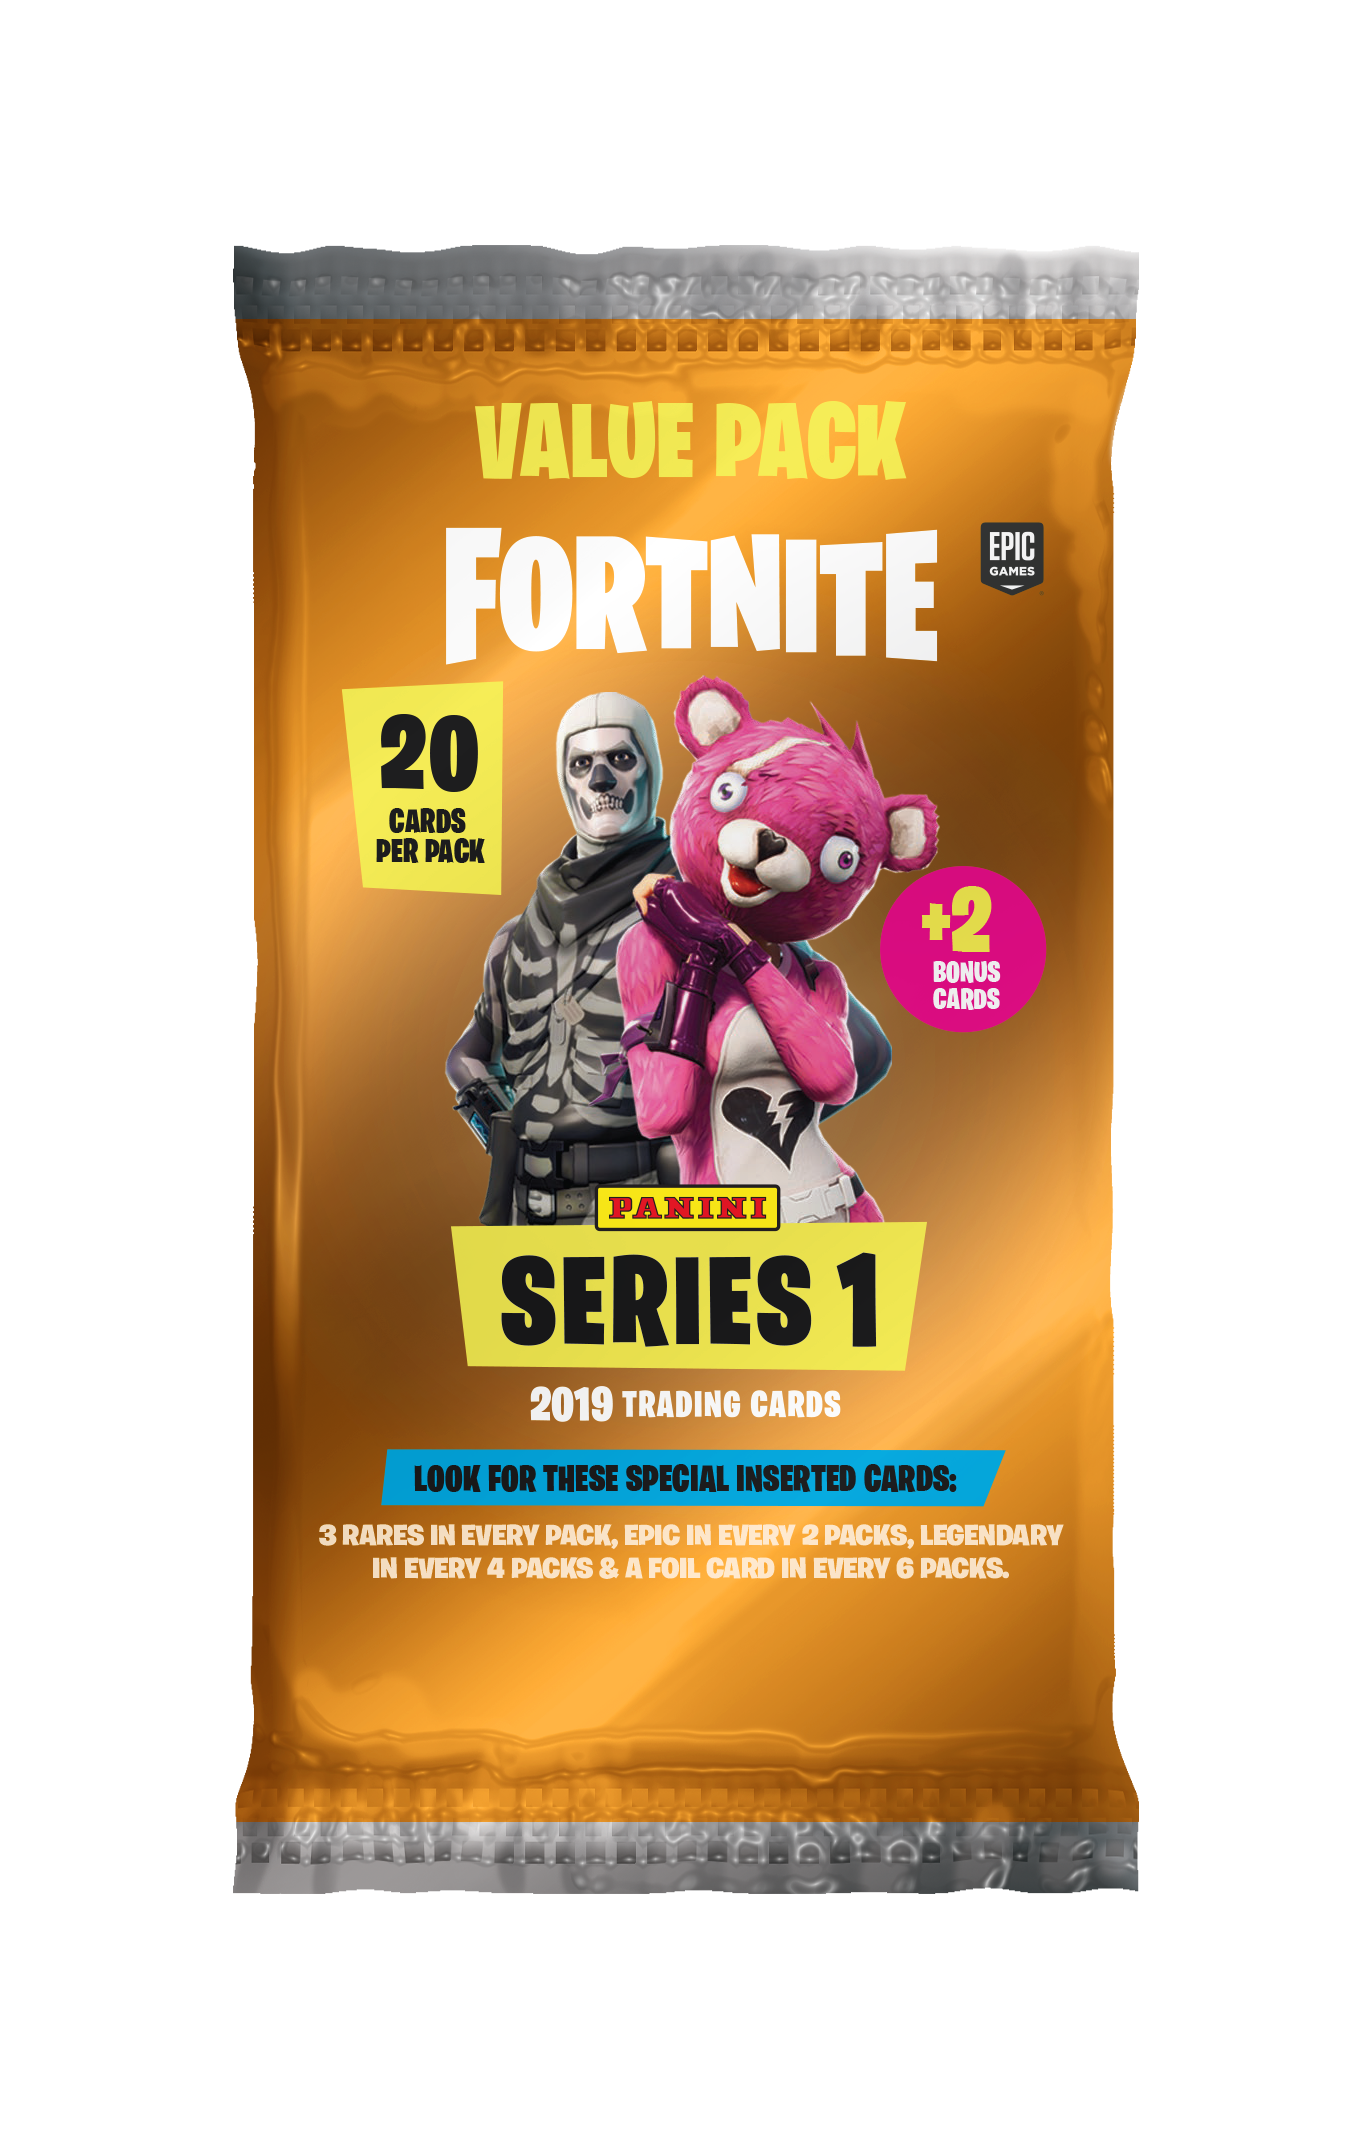 Trade Value For Fortnite Game Fortnite Trading Cards Series 1 Foil Pack 6 Cards Coleccionables Cromos Cartas Coleccionables Y Accesorios